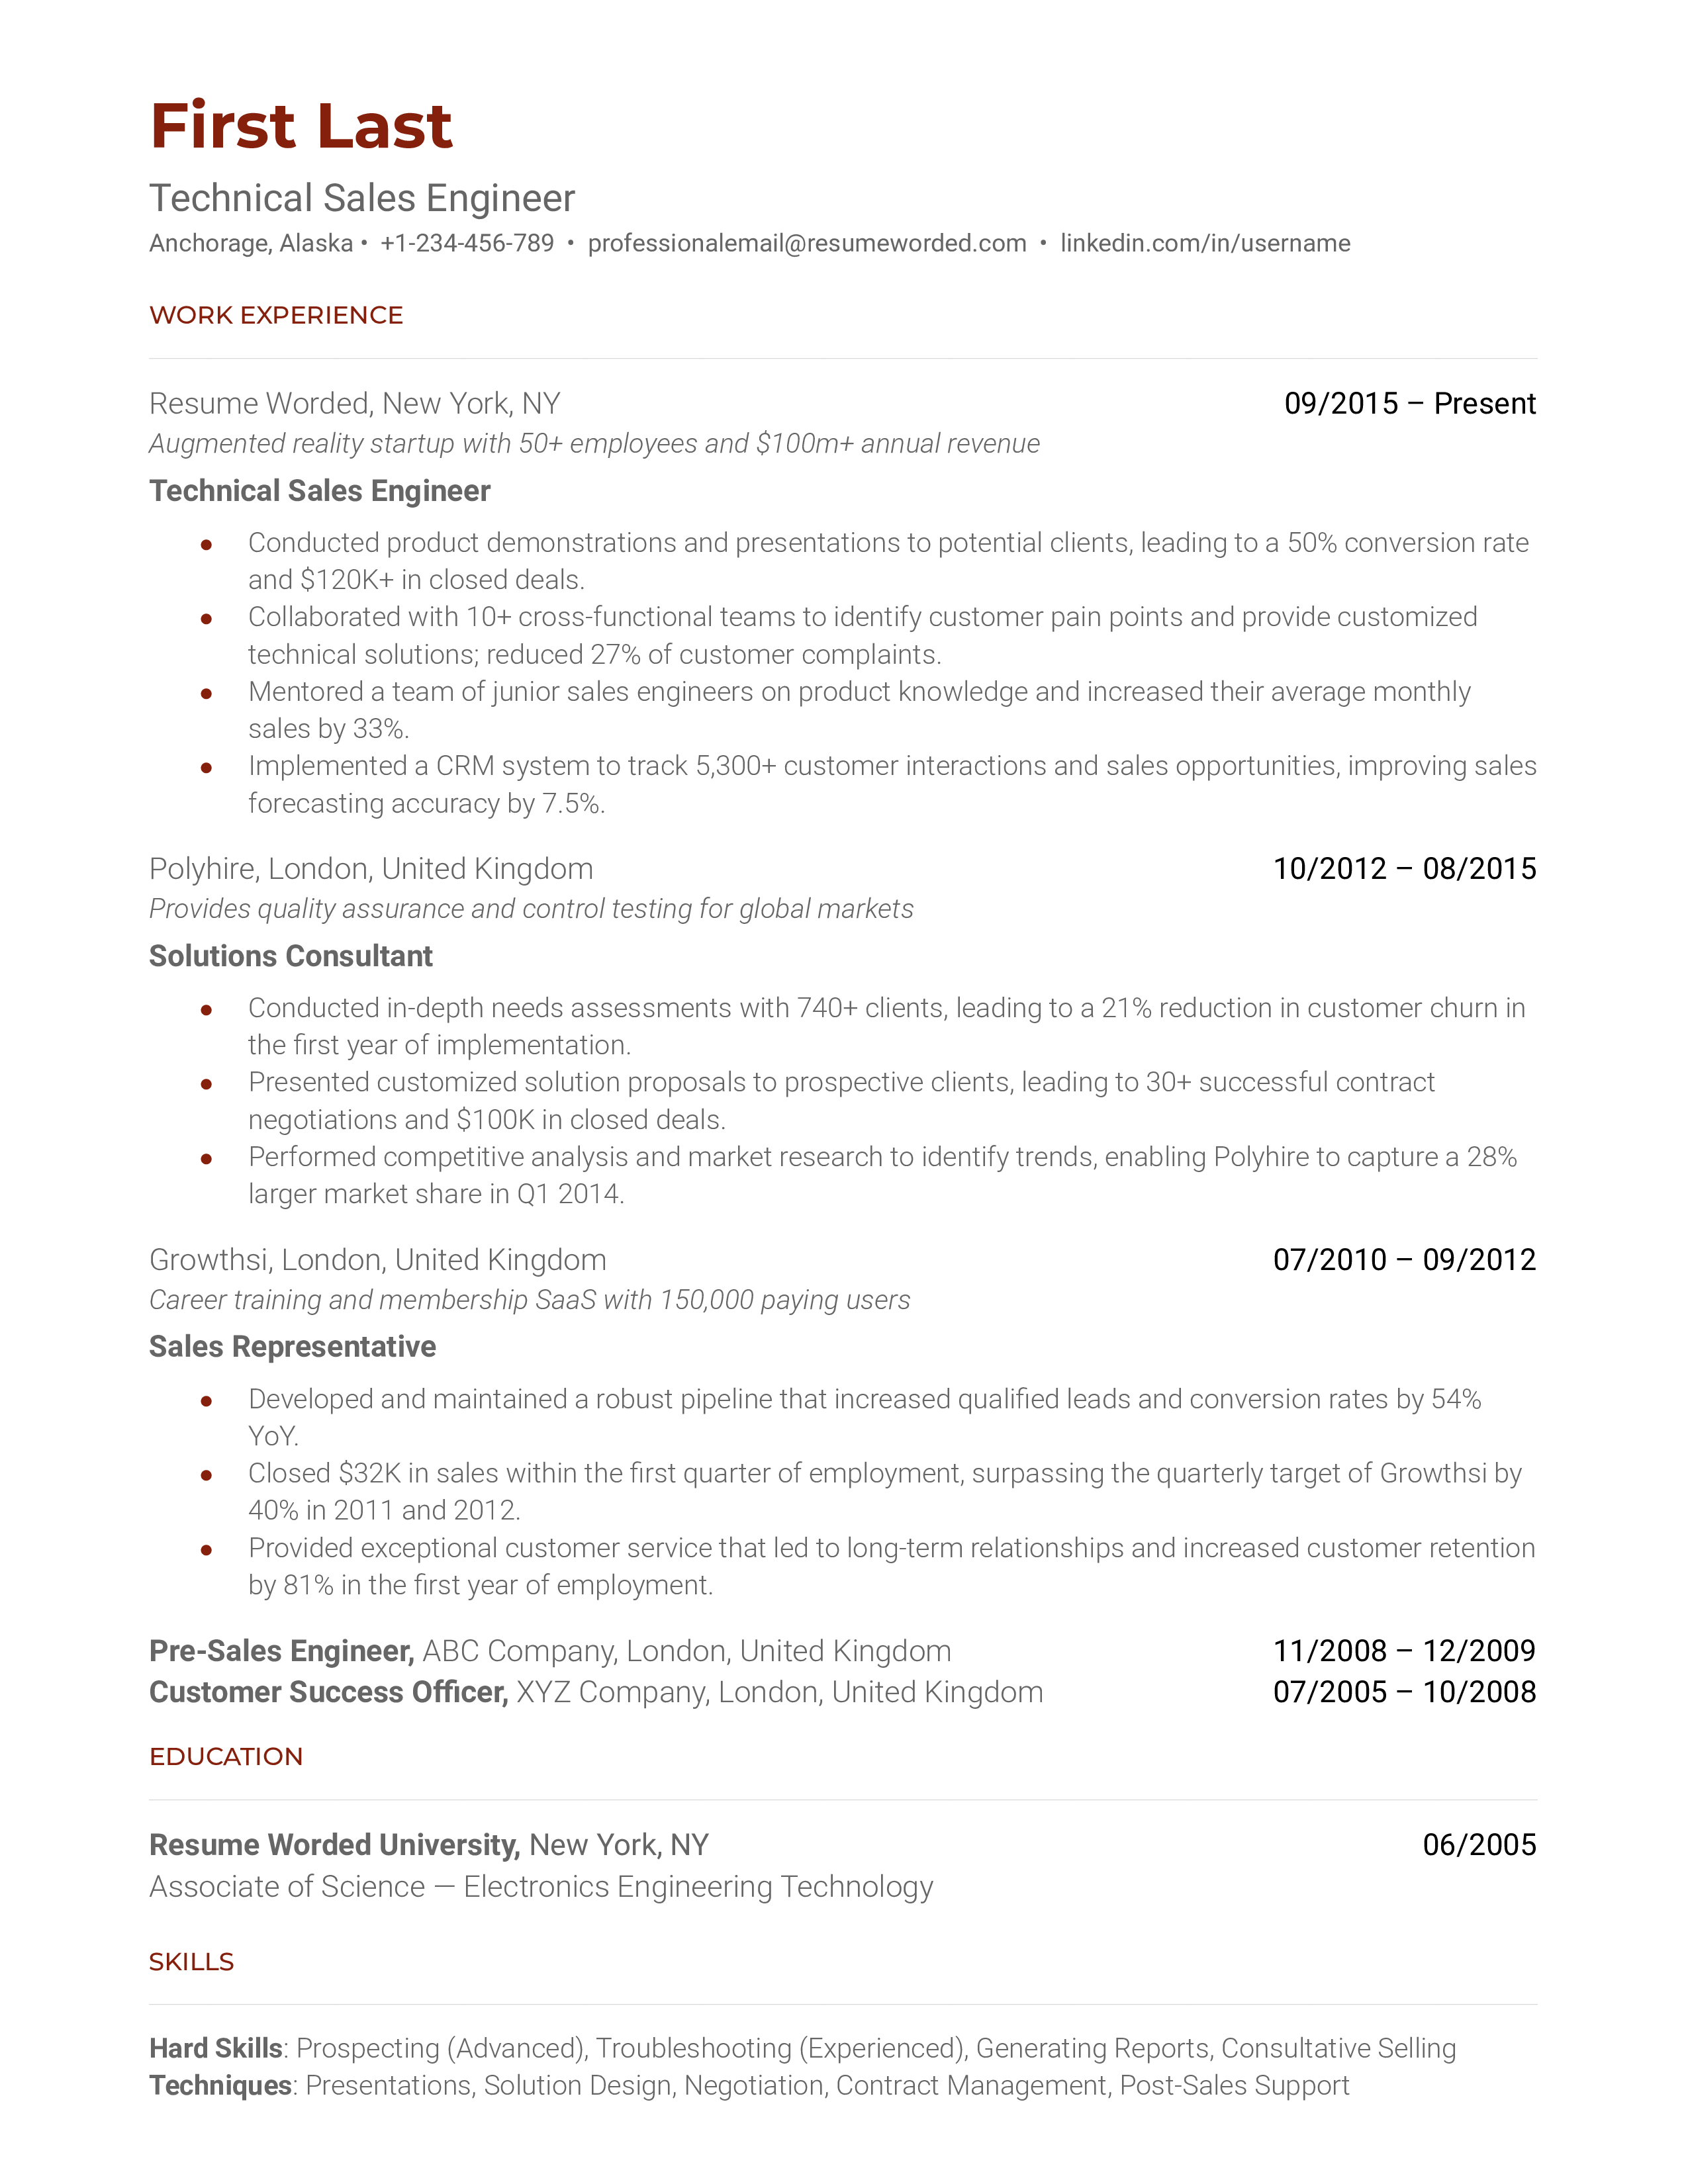 A CV for a Technical Sales Engineer showcasing technical skills and quantifiable sales achievements.